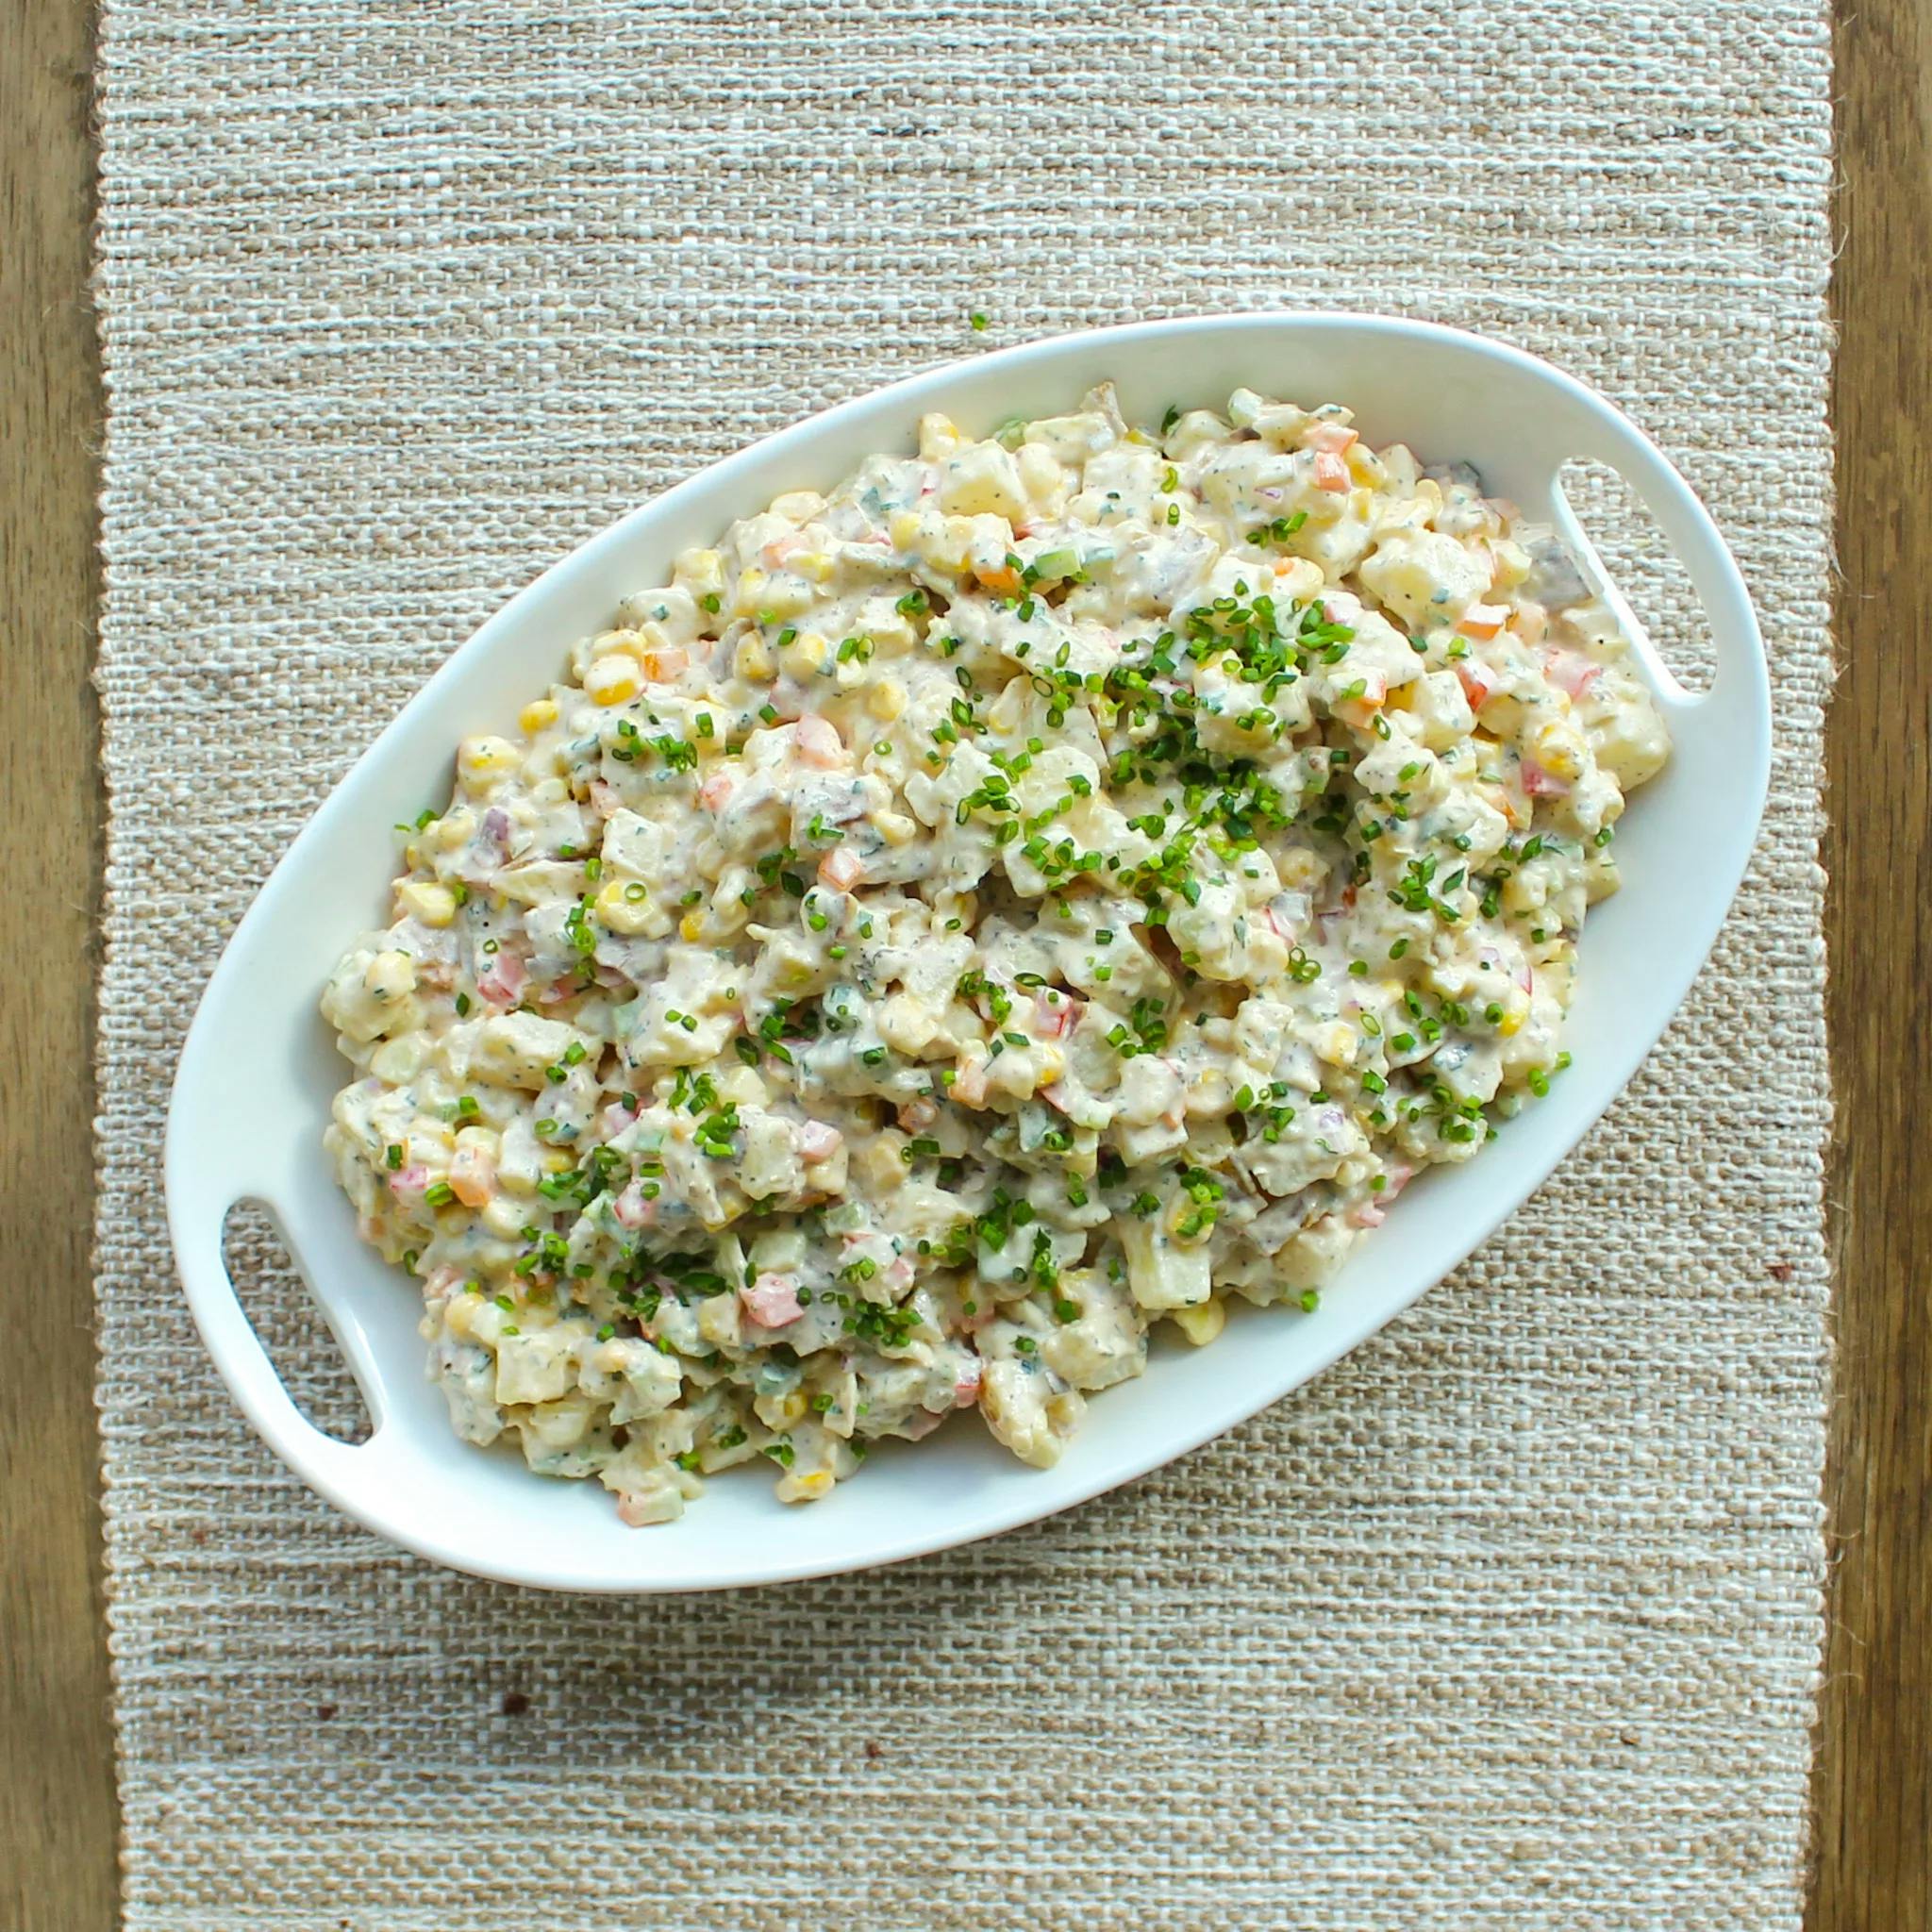 Picture for Summer Potato Salad